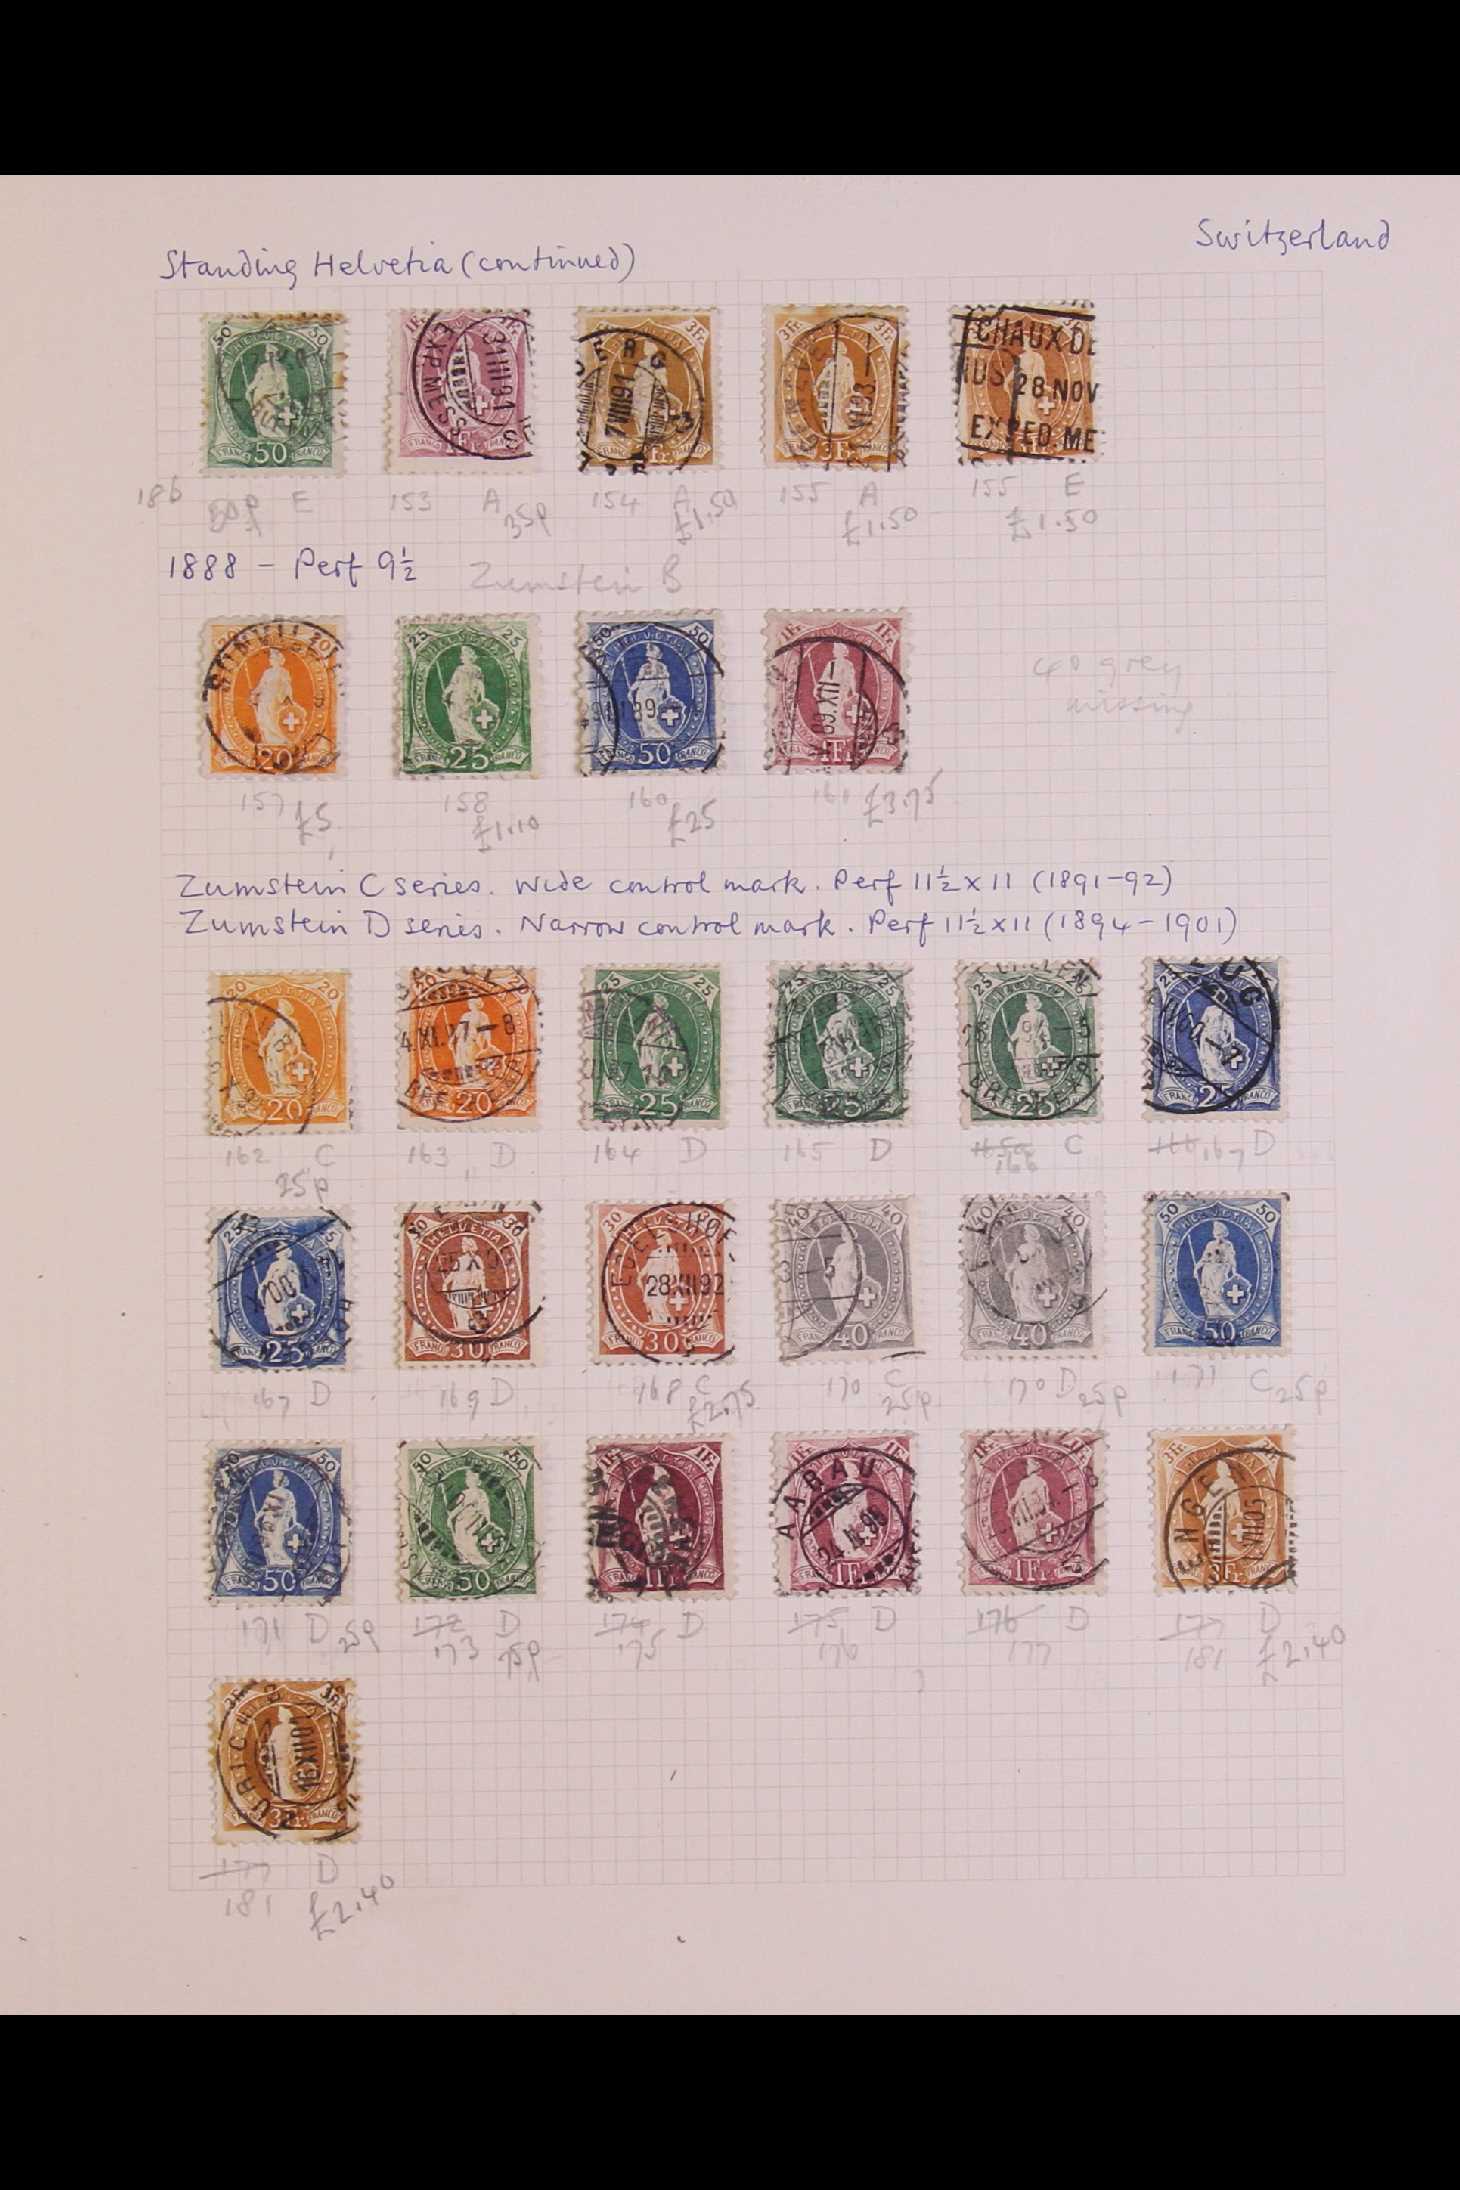 SWITZERLAND 1850 - 1959 COLLECTION of chiefly used stamps on leaves, incl 1850 5r & 10r, 1851 5r, - Image 5 of 17